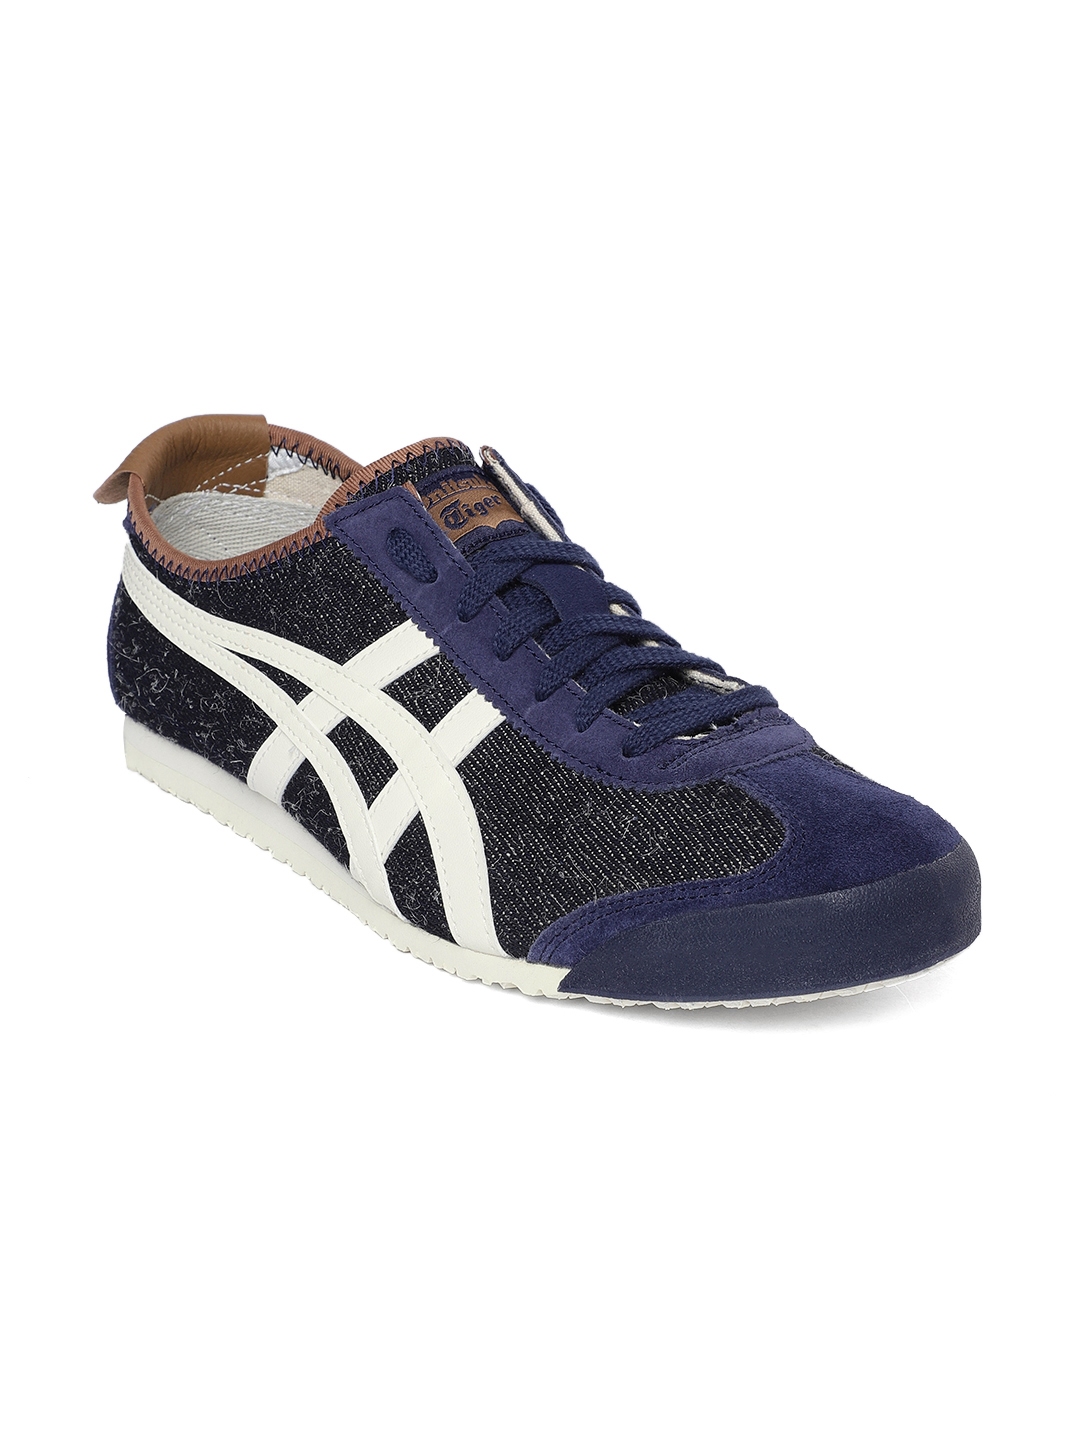 Buy Onitsuka Tiger Mexico 66 - Casual Shoes for Unisex 10393373 | Myntra